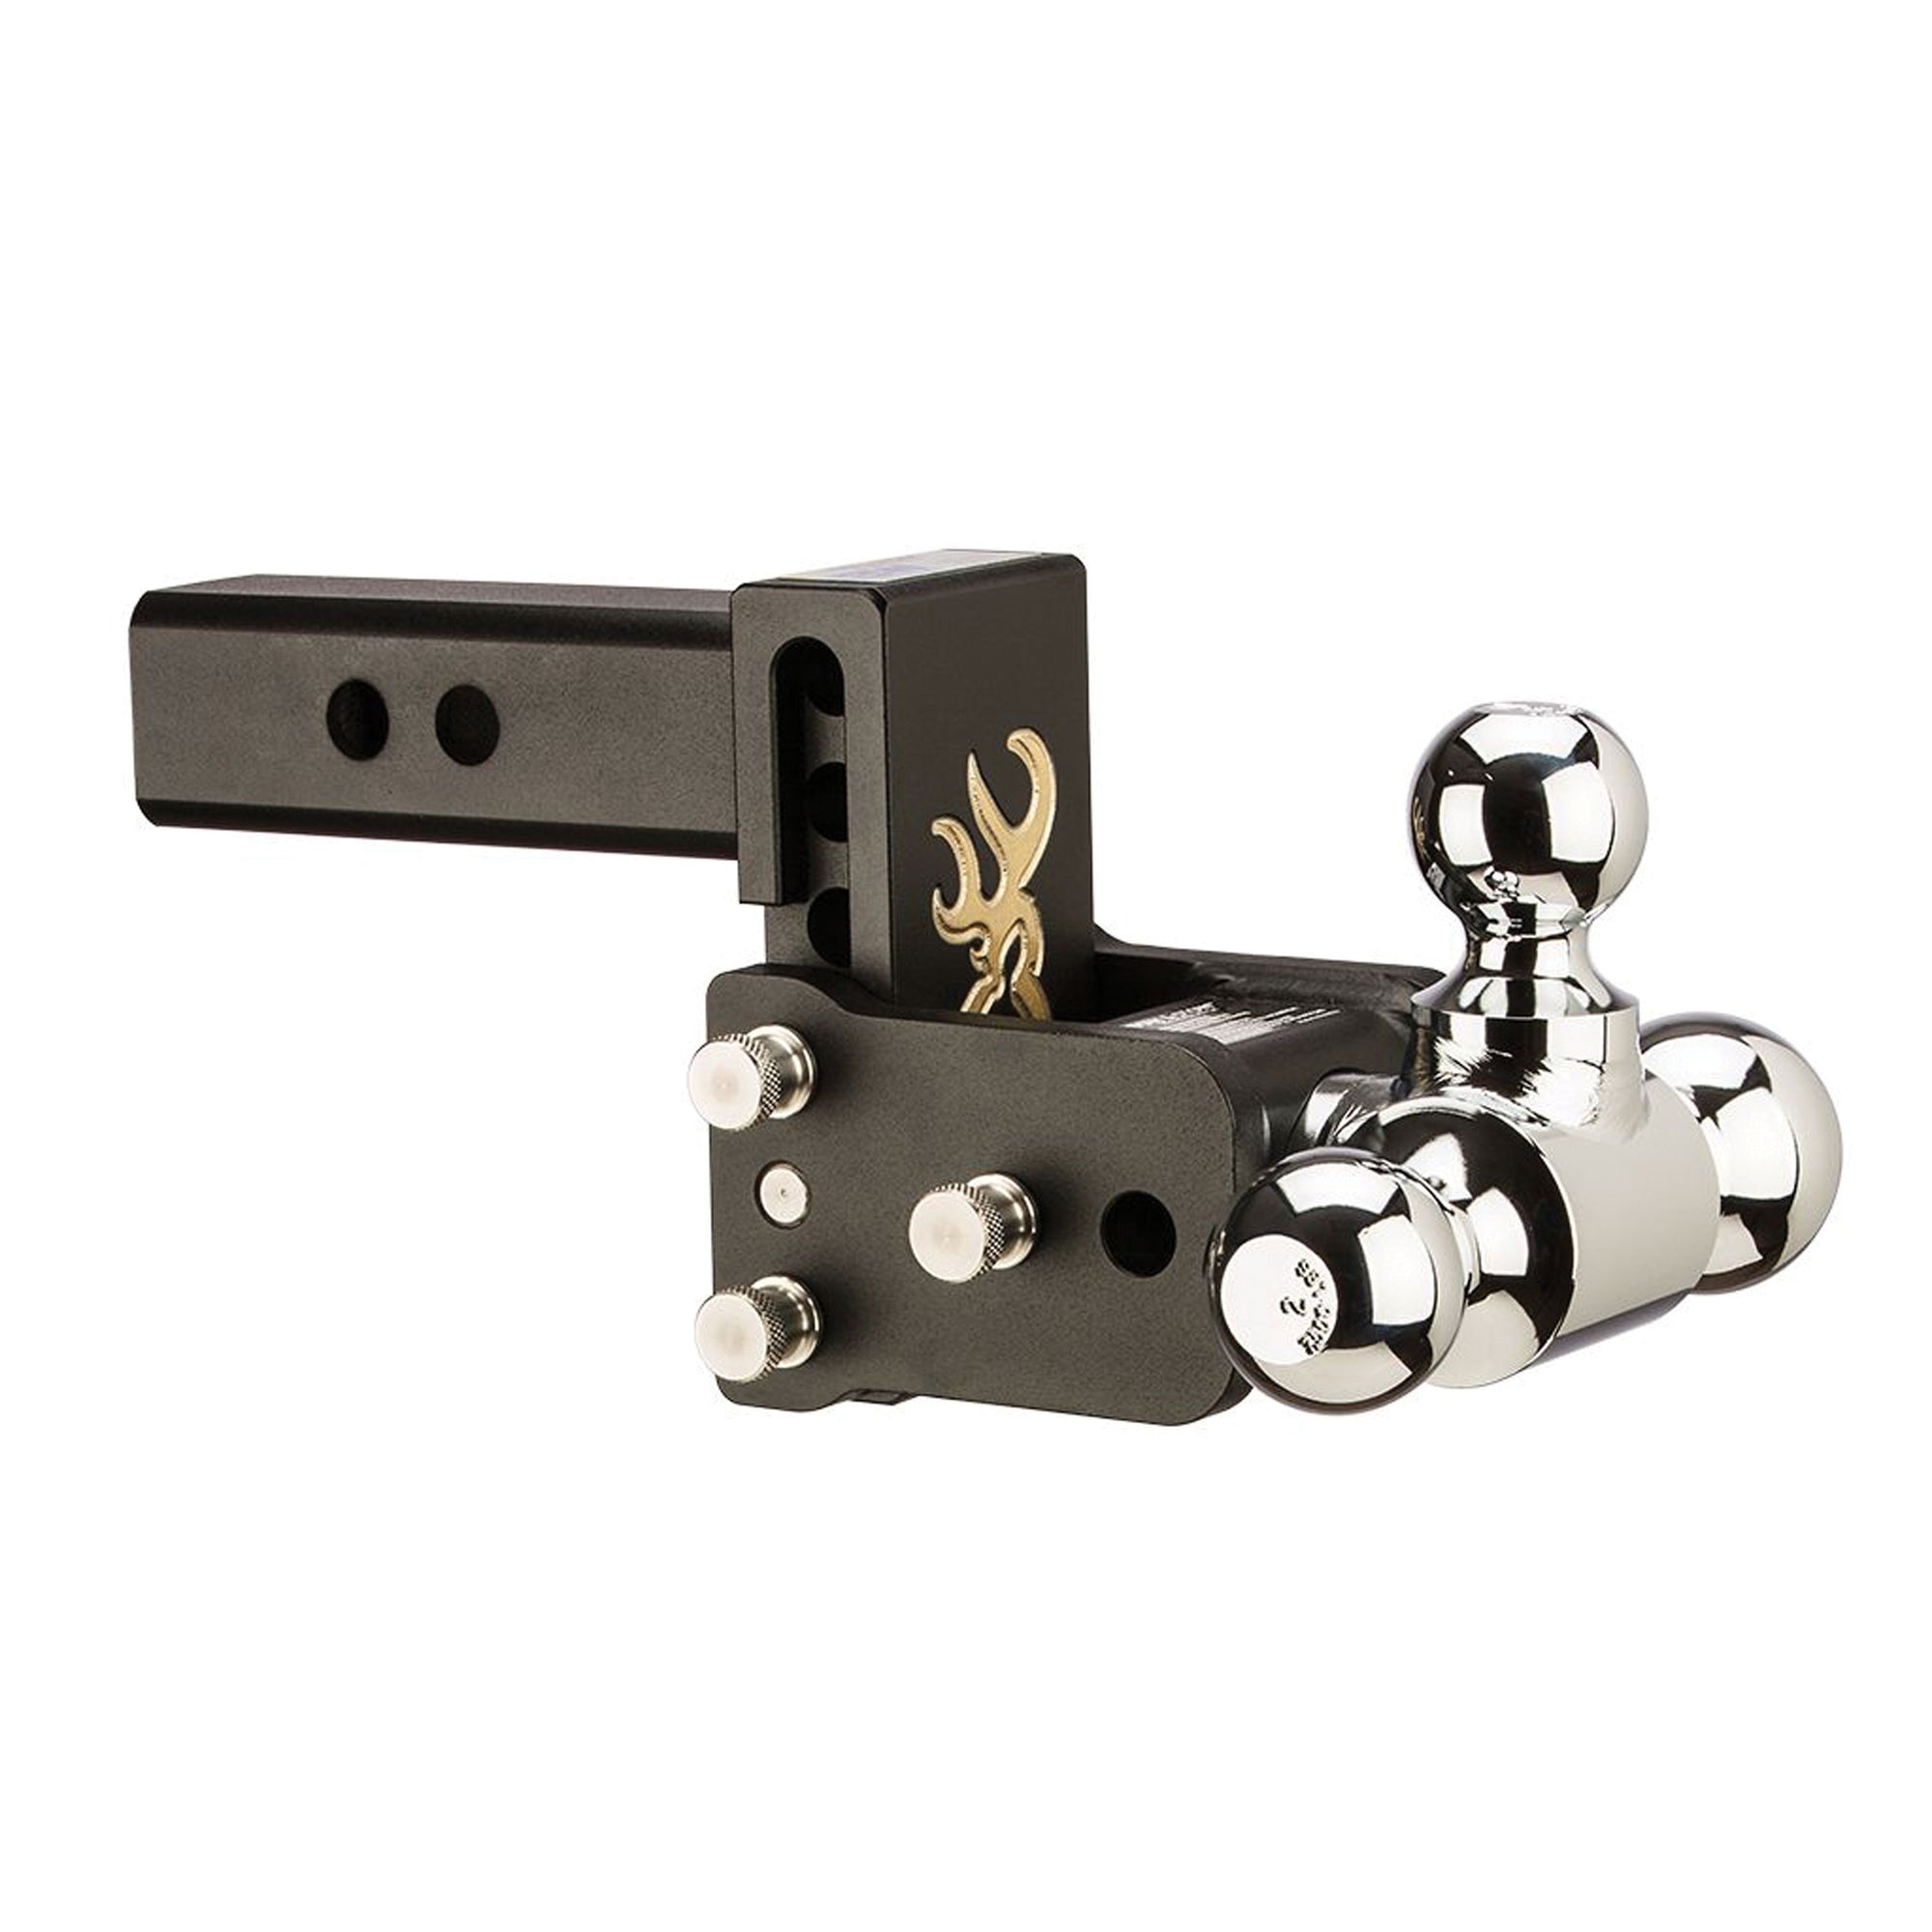 B&W Trailer Hitches TS10047BB Tow and Stow Adjustable Ball Mount - 1-7/8", 2" & 2-5/16" Ball, 3" Drop, 3.5" Rise, Browning